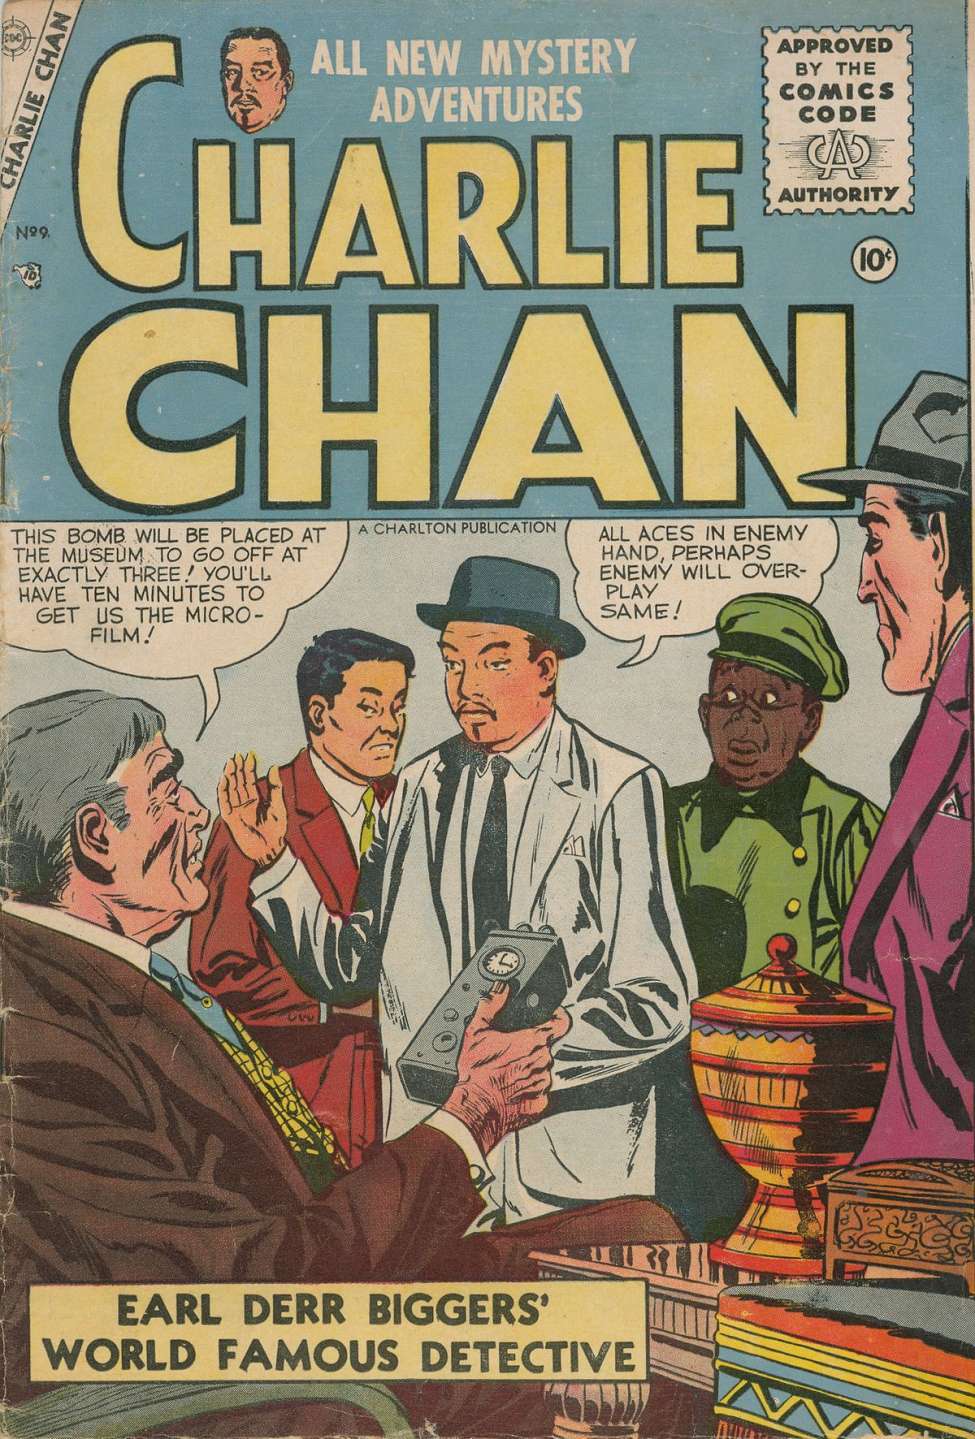 Book Cover For Charlie Chan 9